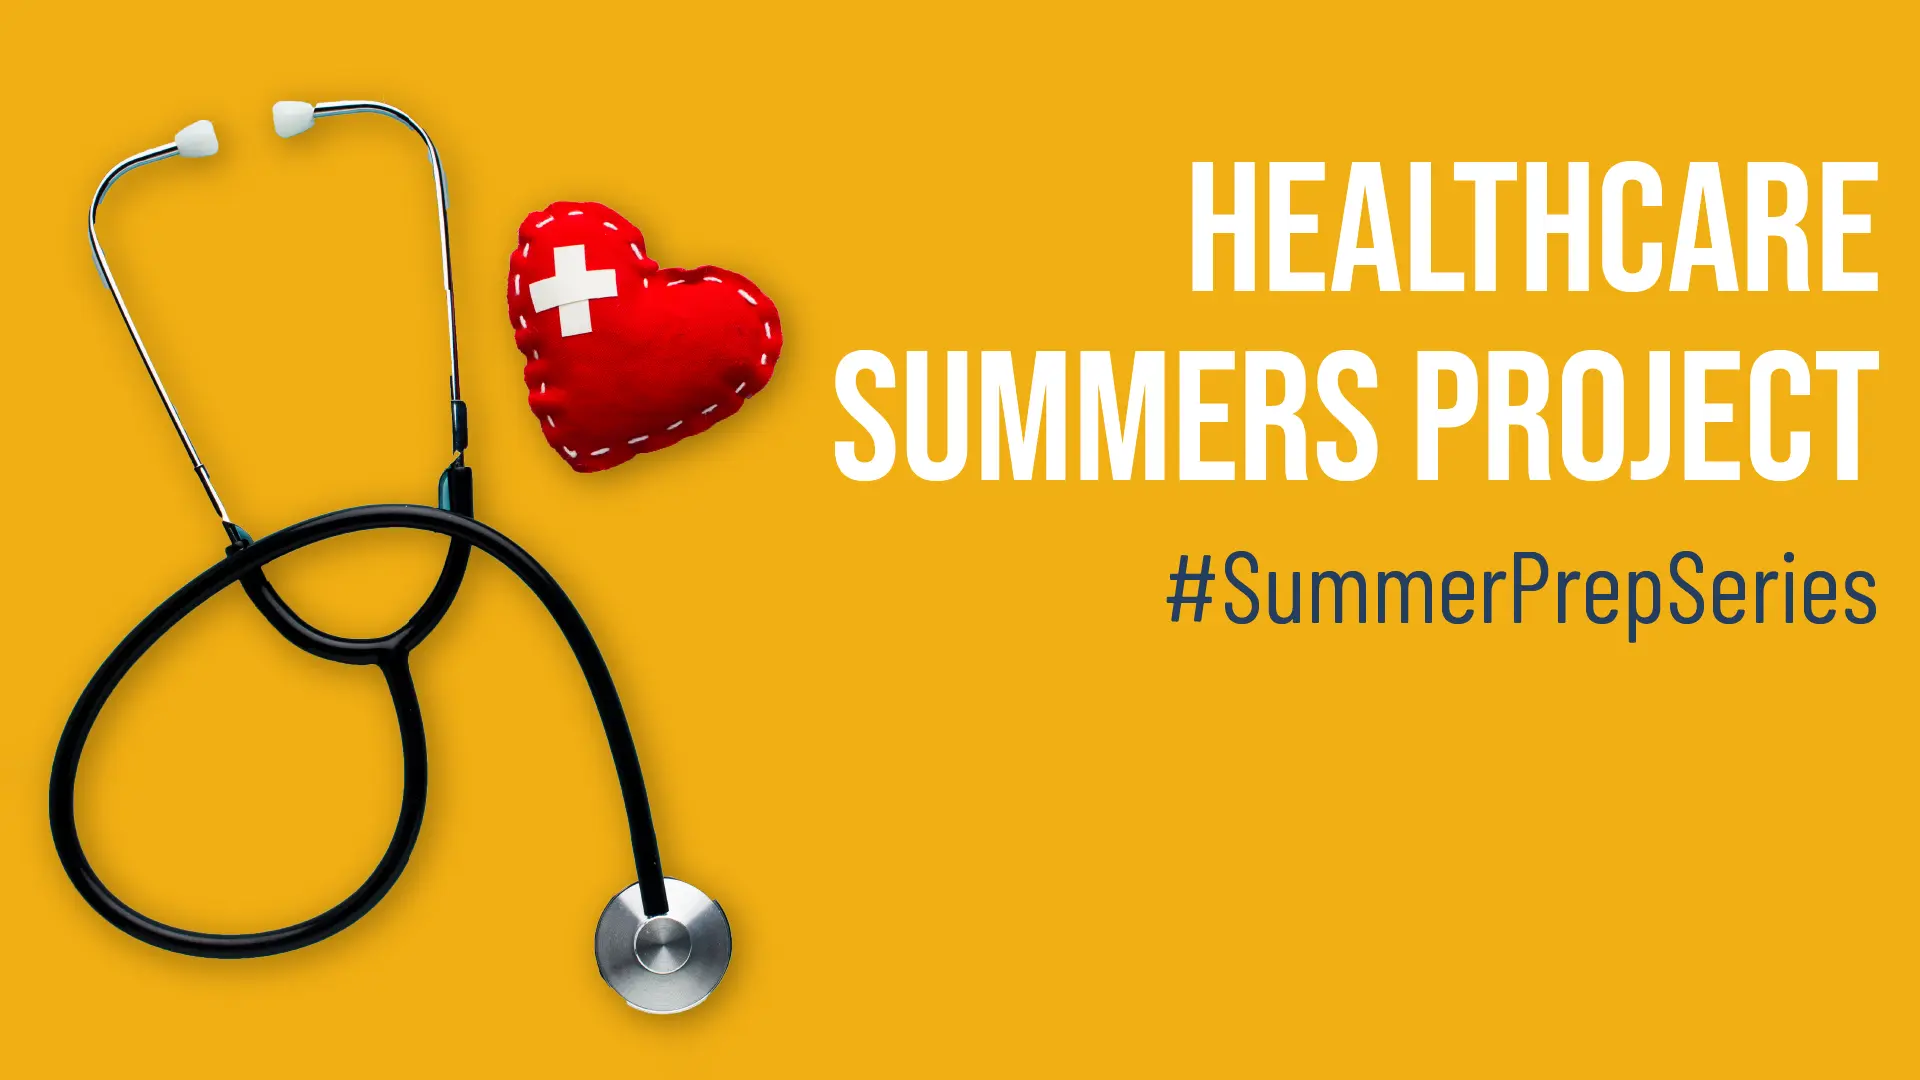 How to Crack a PPO in Healthcare? #SummerPrepSeries